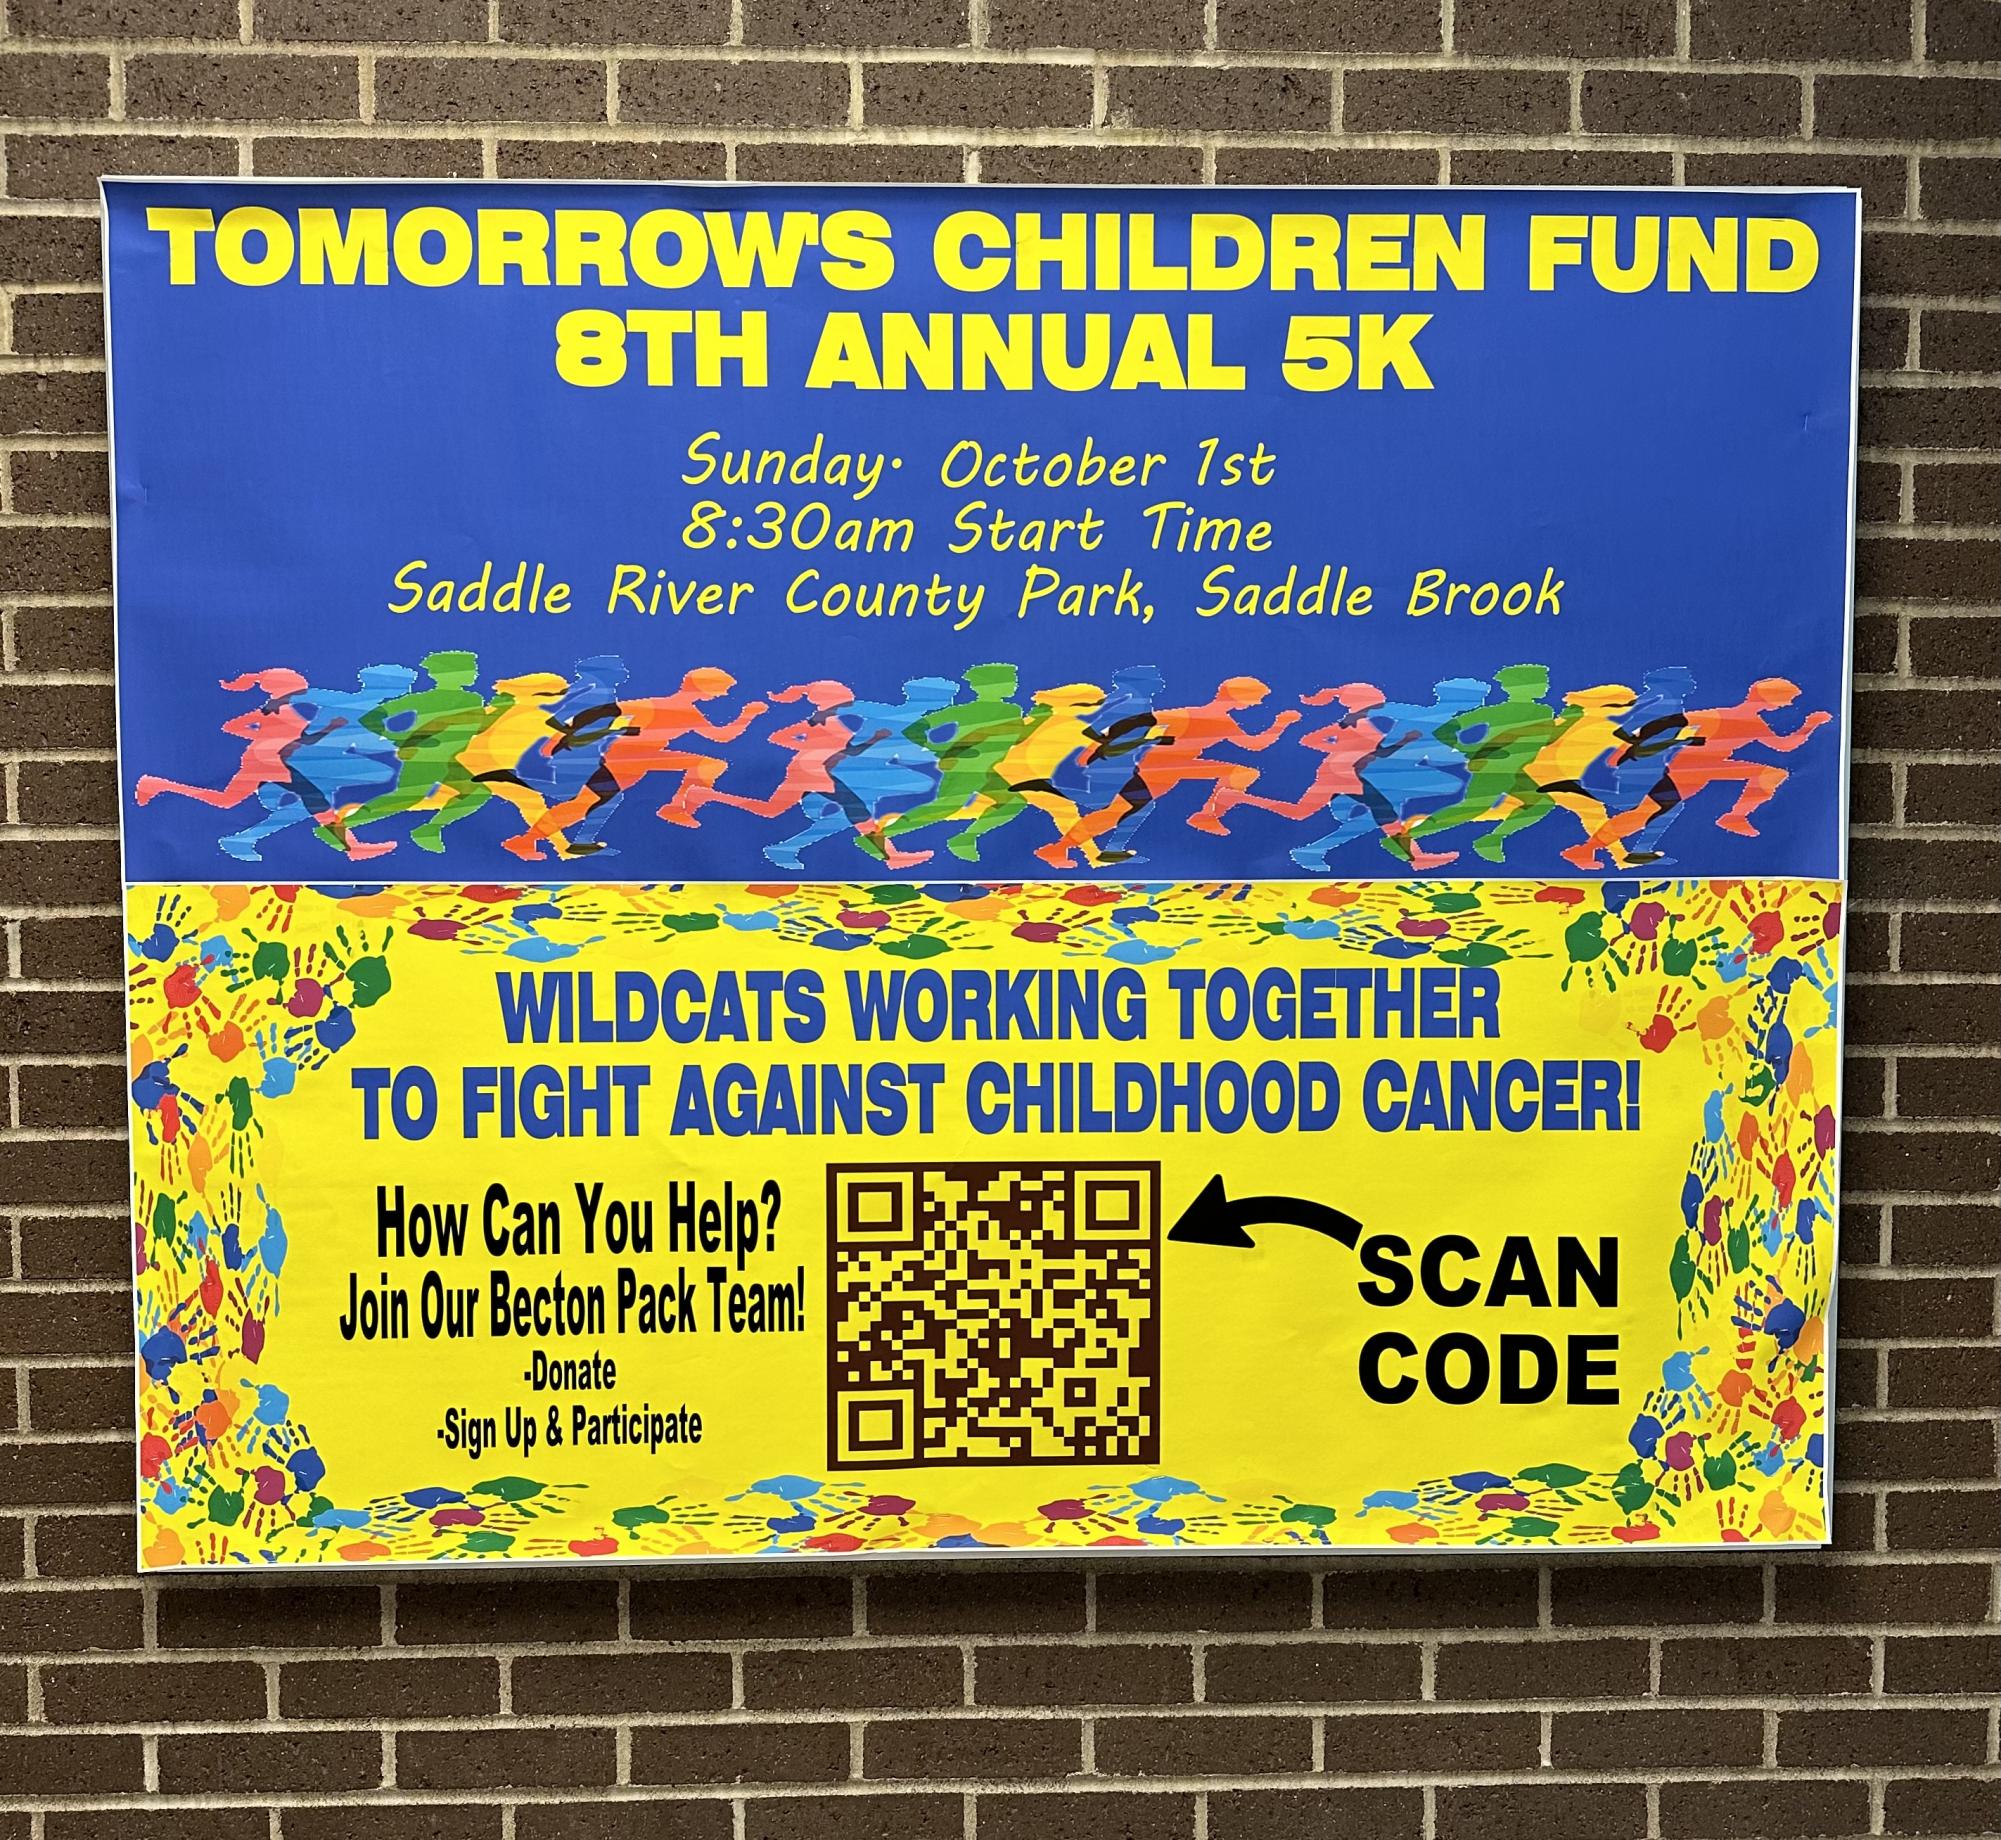 Join Bectons 8th Annual Tomorrow’s Children Fund 5K